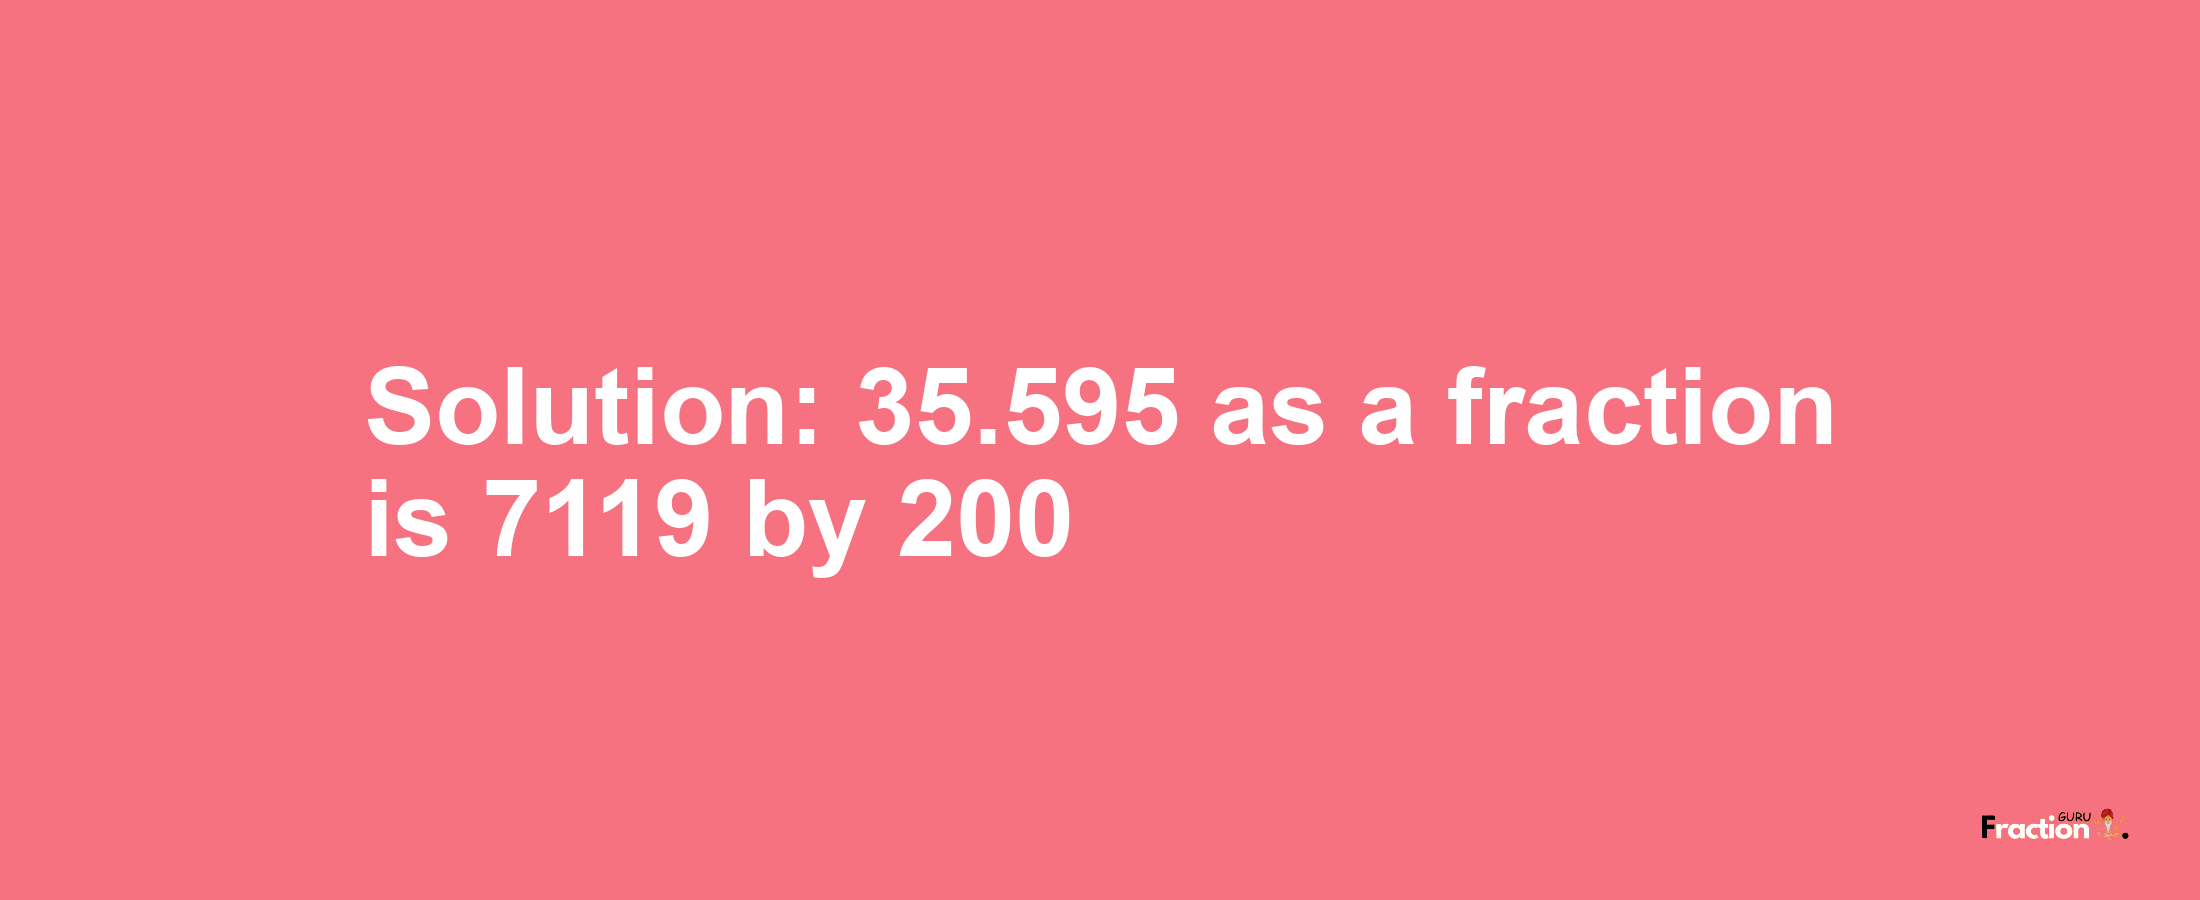 Solution:35.595 as a fraction is 7119/200